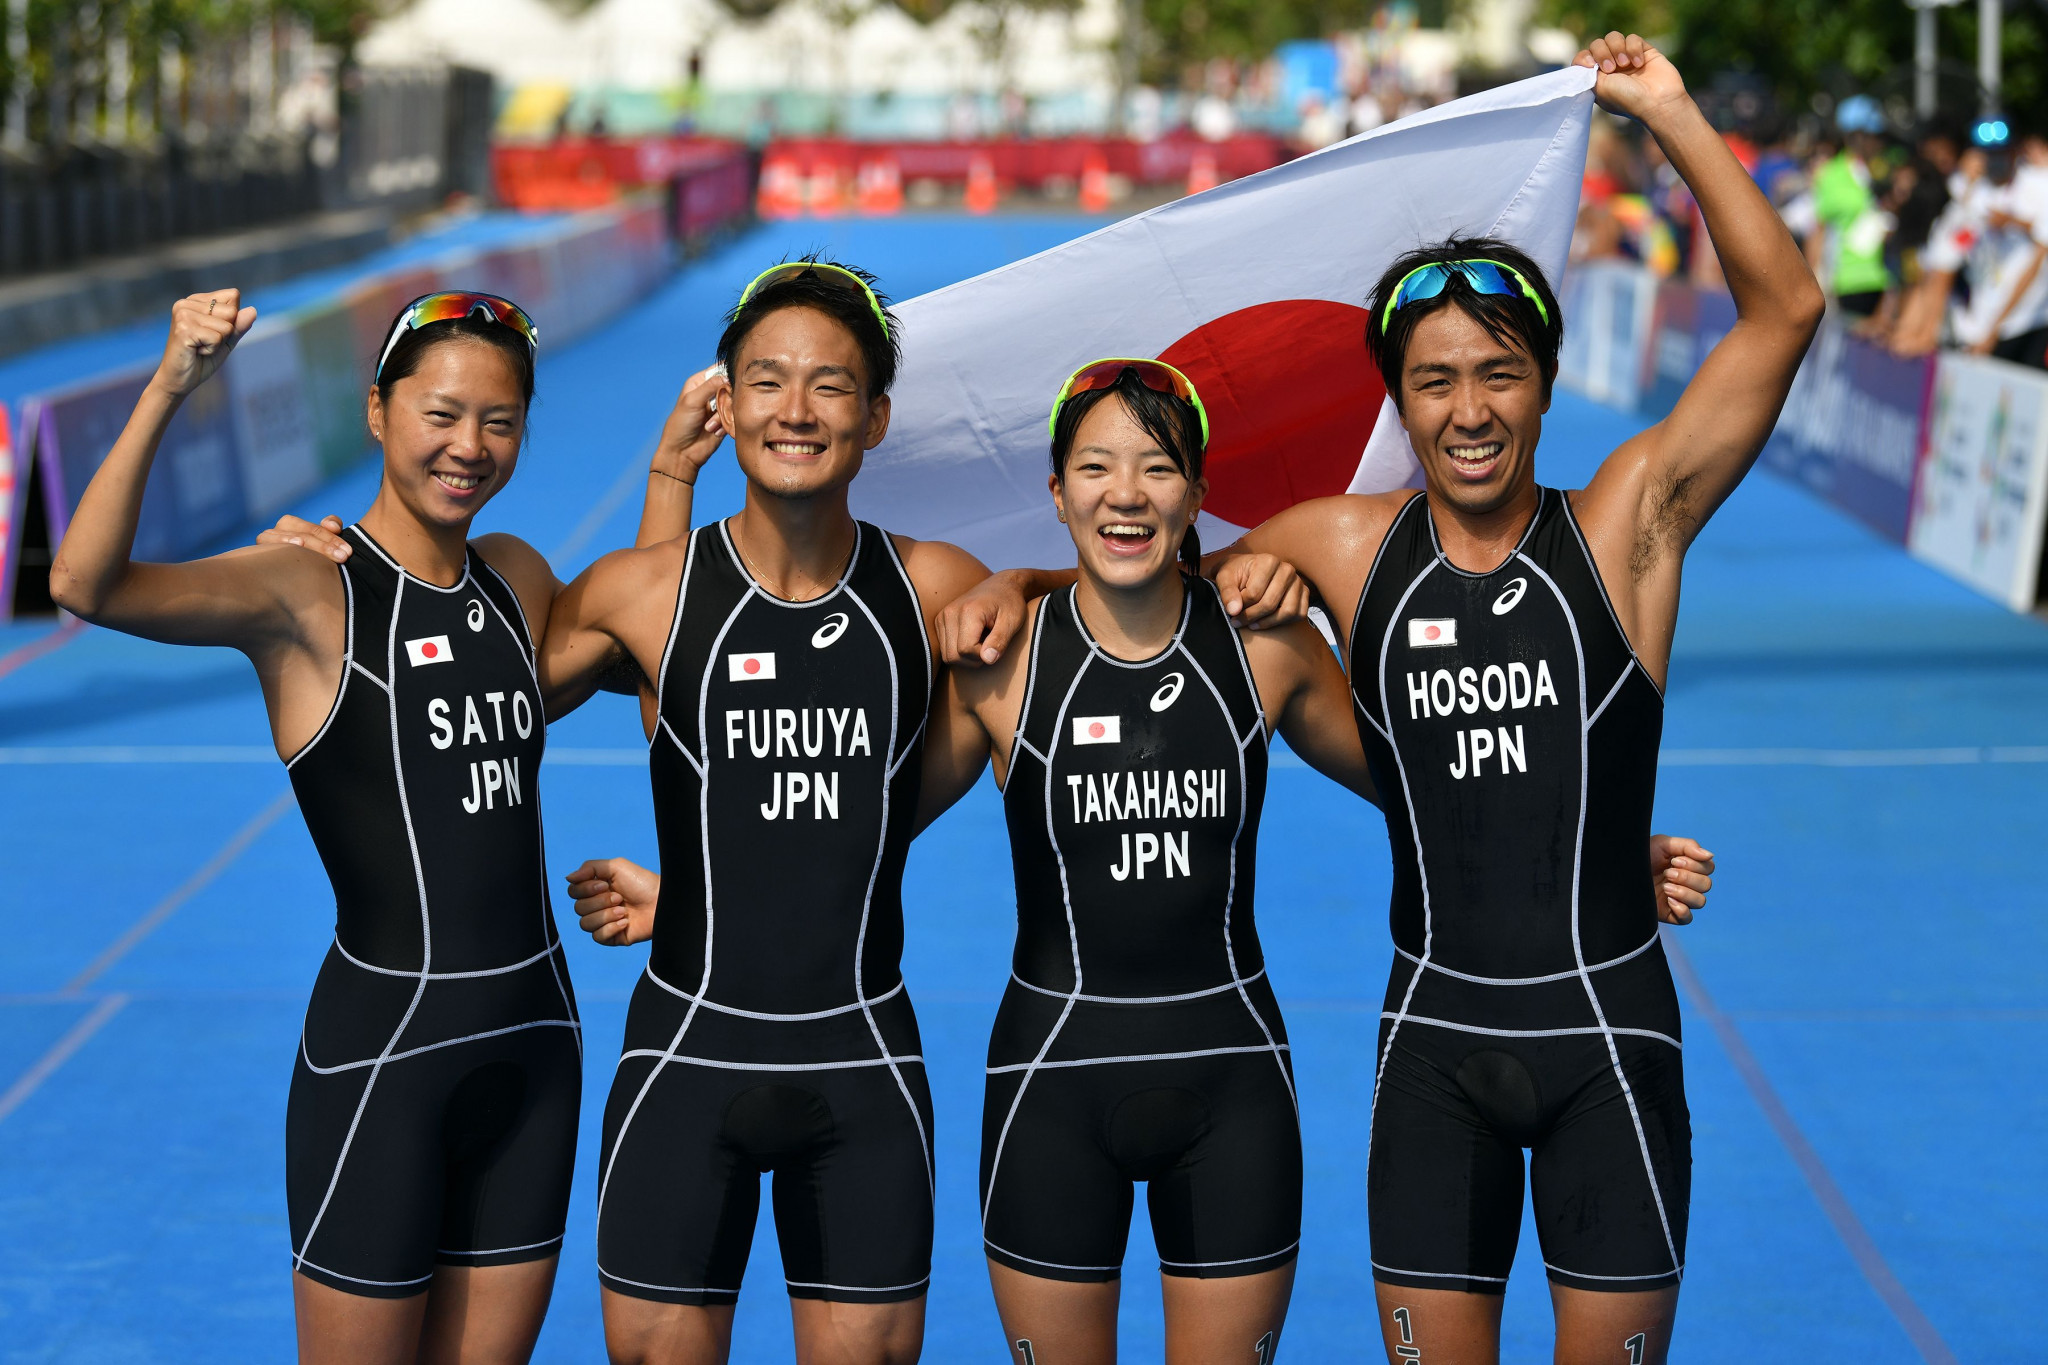 Japan clinched the last gold medal of the 2018 Asian Games here after successfully defending their mixed triathlon title today ©Getty Images